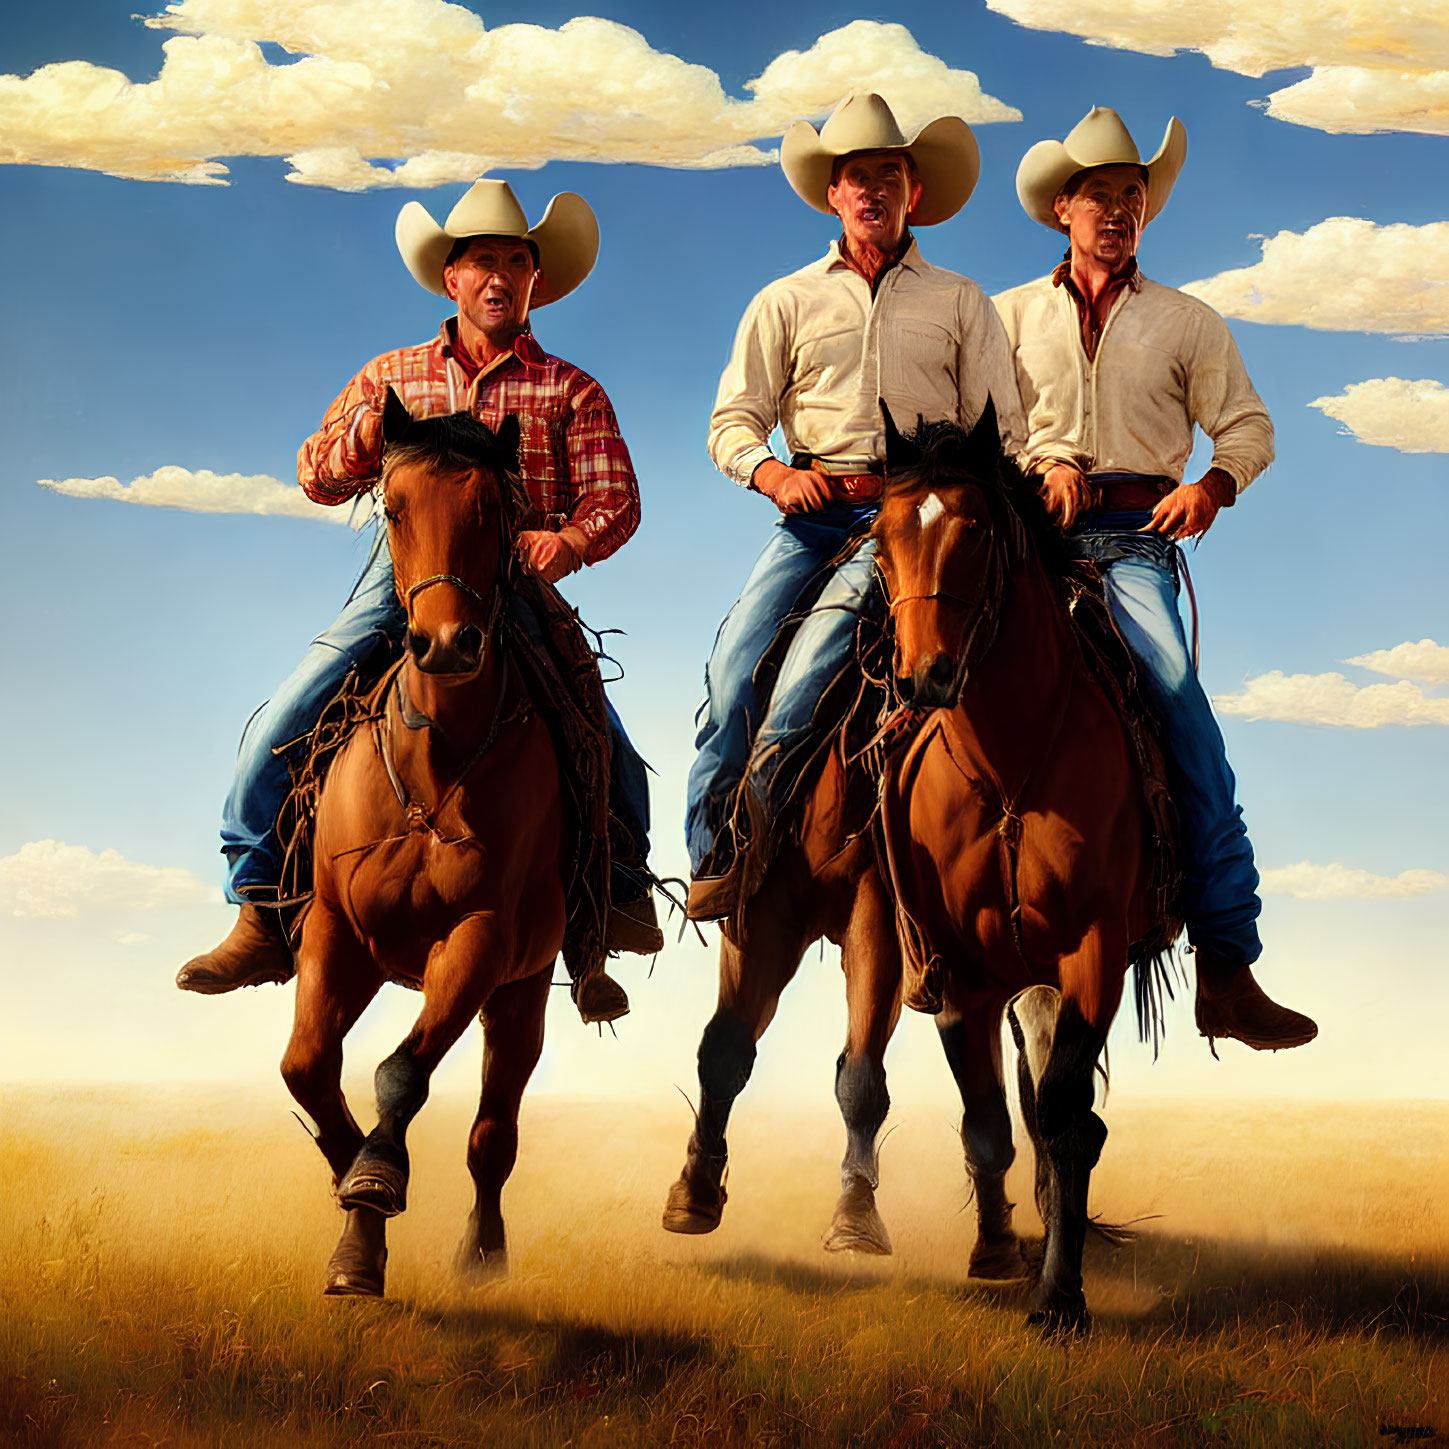 Cowboys on horses in grassy plain under cloudy sky